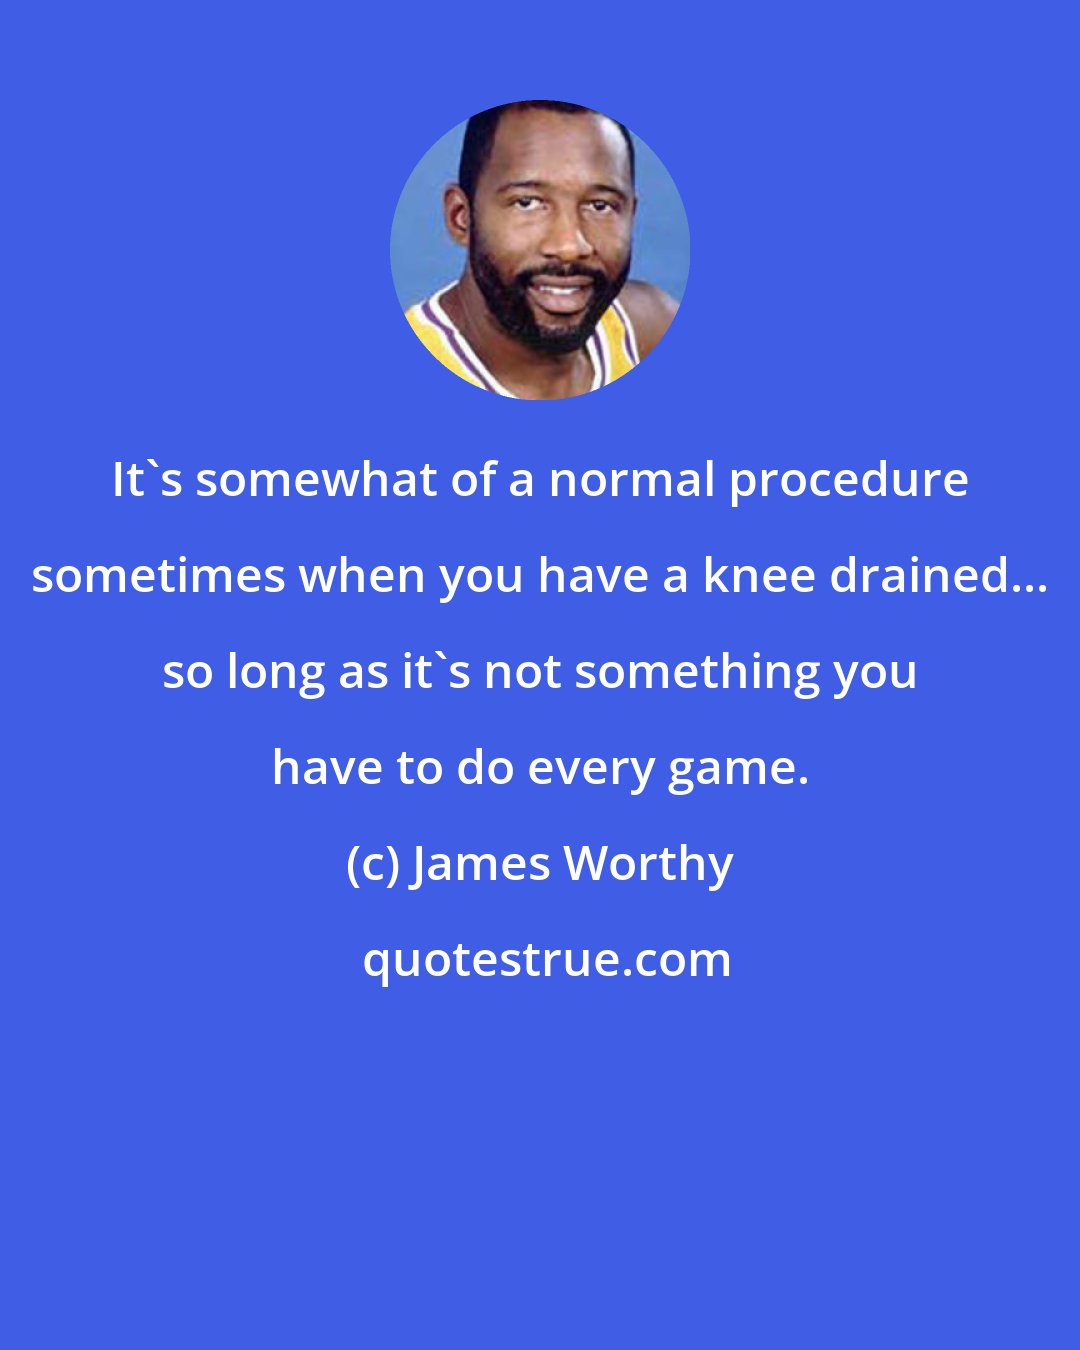 James Worthy: It's somewhat of a normal procedure sometimes when you have a knee drained... so long as it's not something you have to do every game.